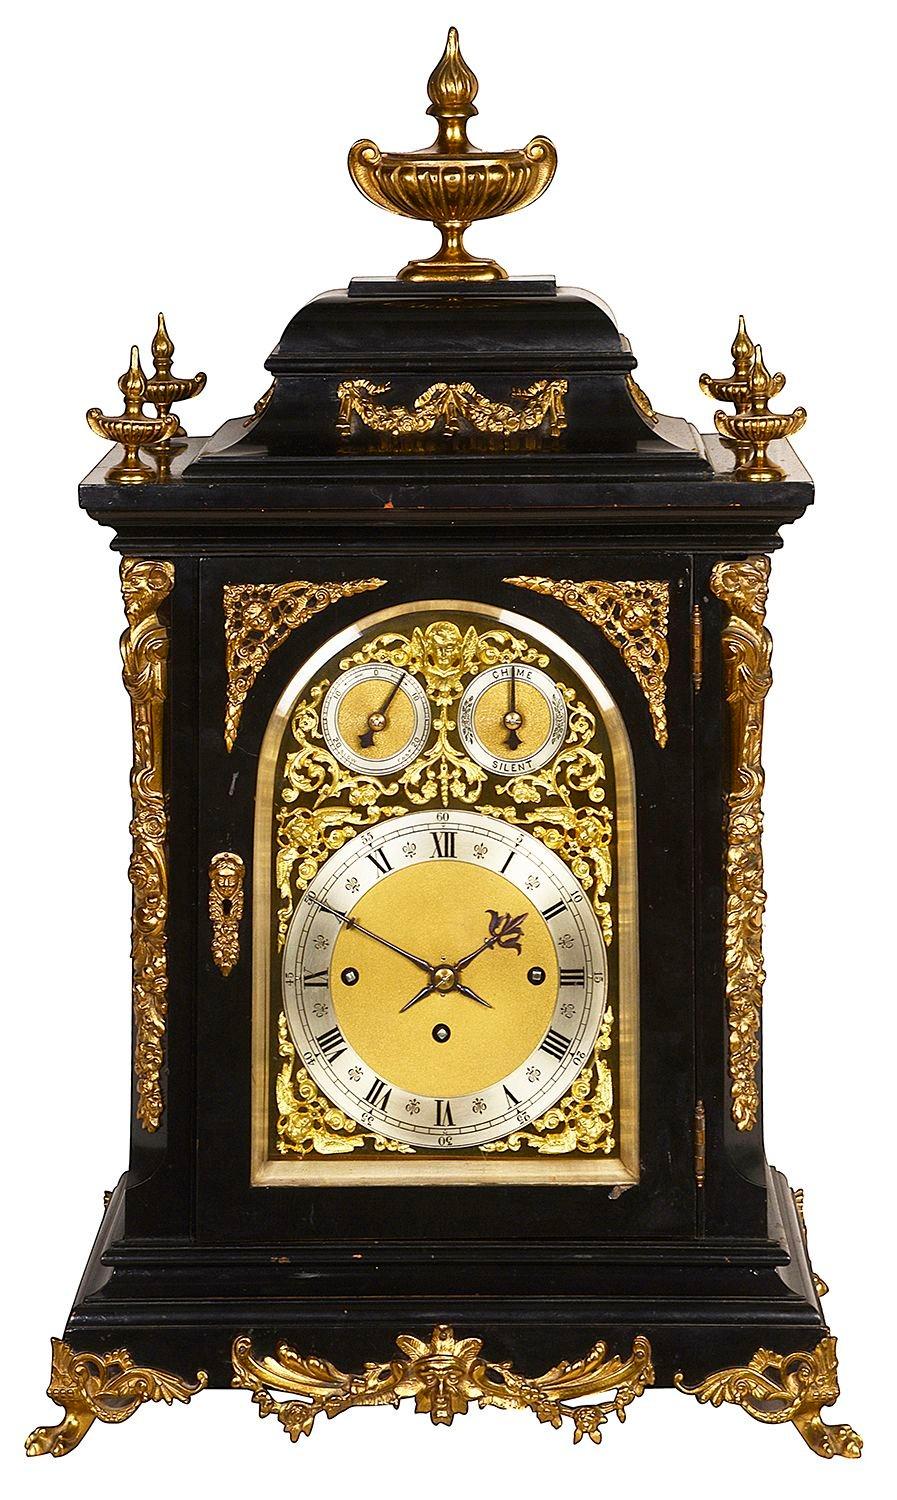 An imposing 19th century ebonised, Westminster chiming mantle / bracket clock, having classical gilded ormolu urn finials and scrolling foliate mounts. An arched brass dial with a three train, eight day movement, with a strike / silent dial and